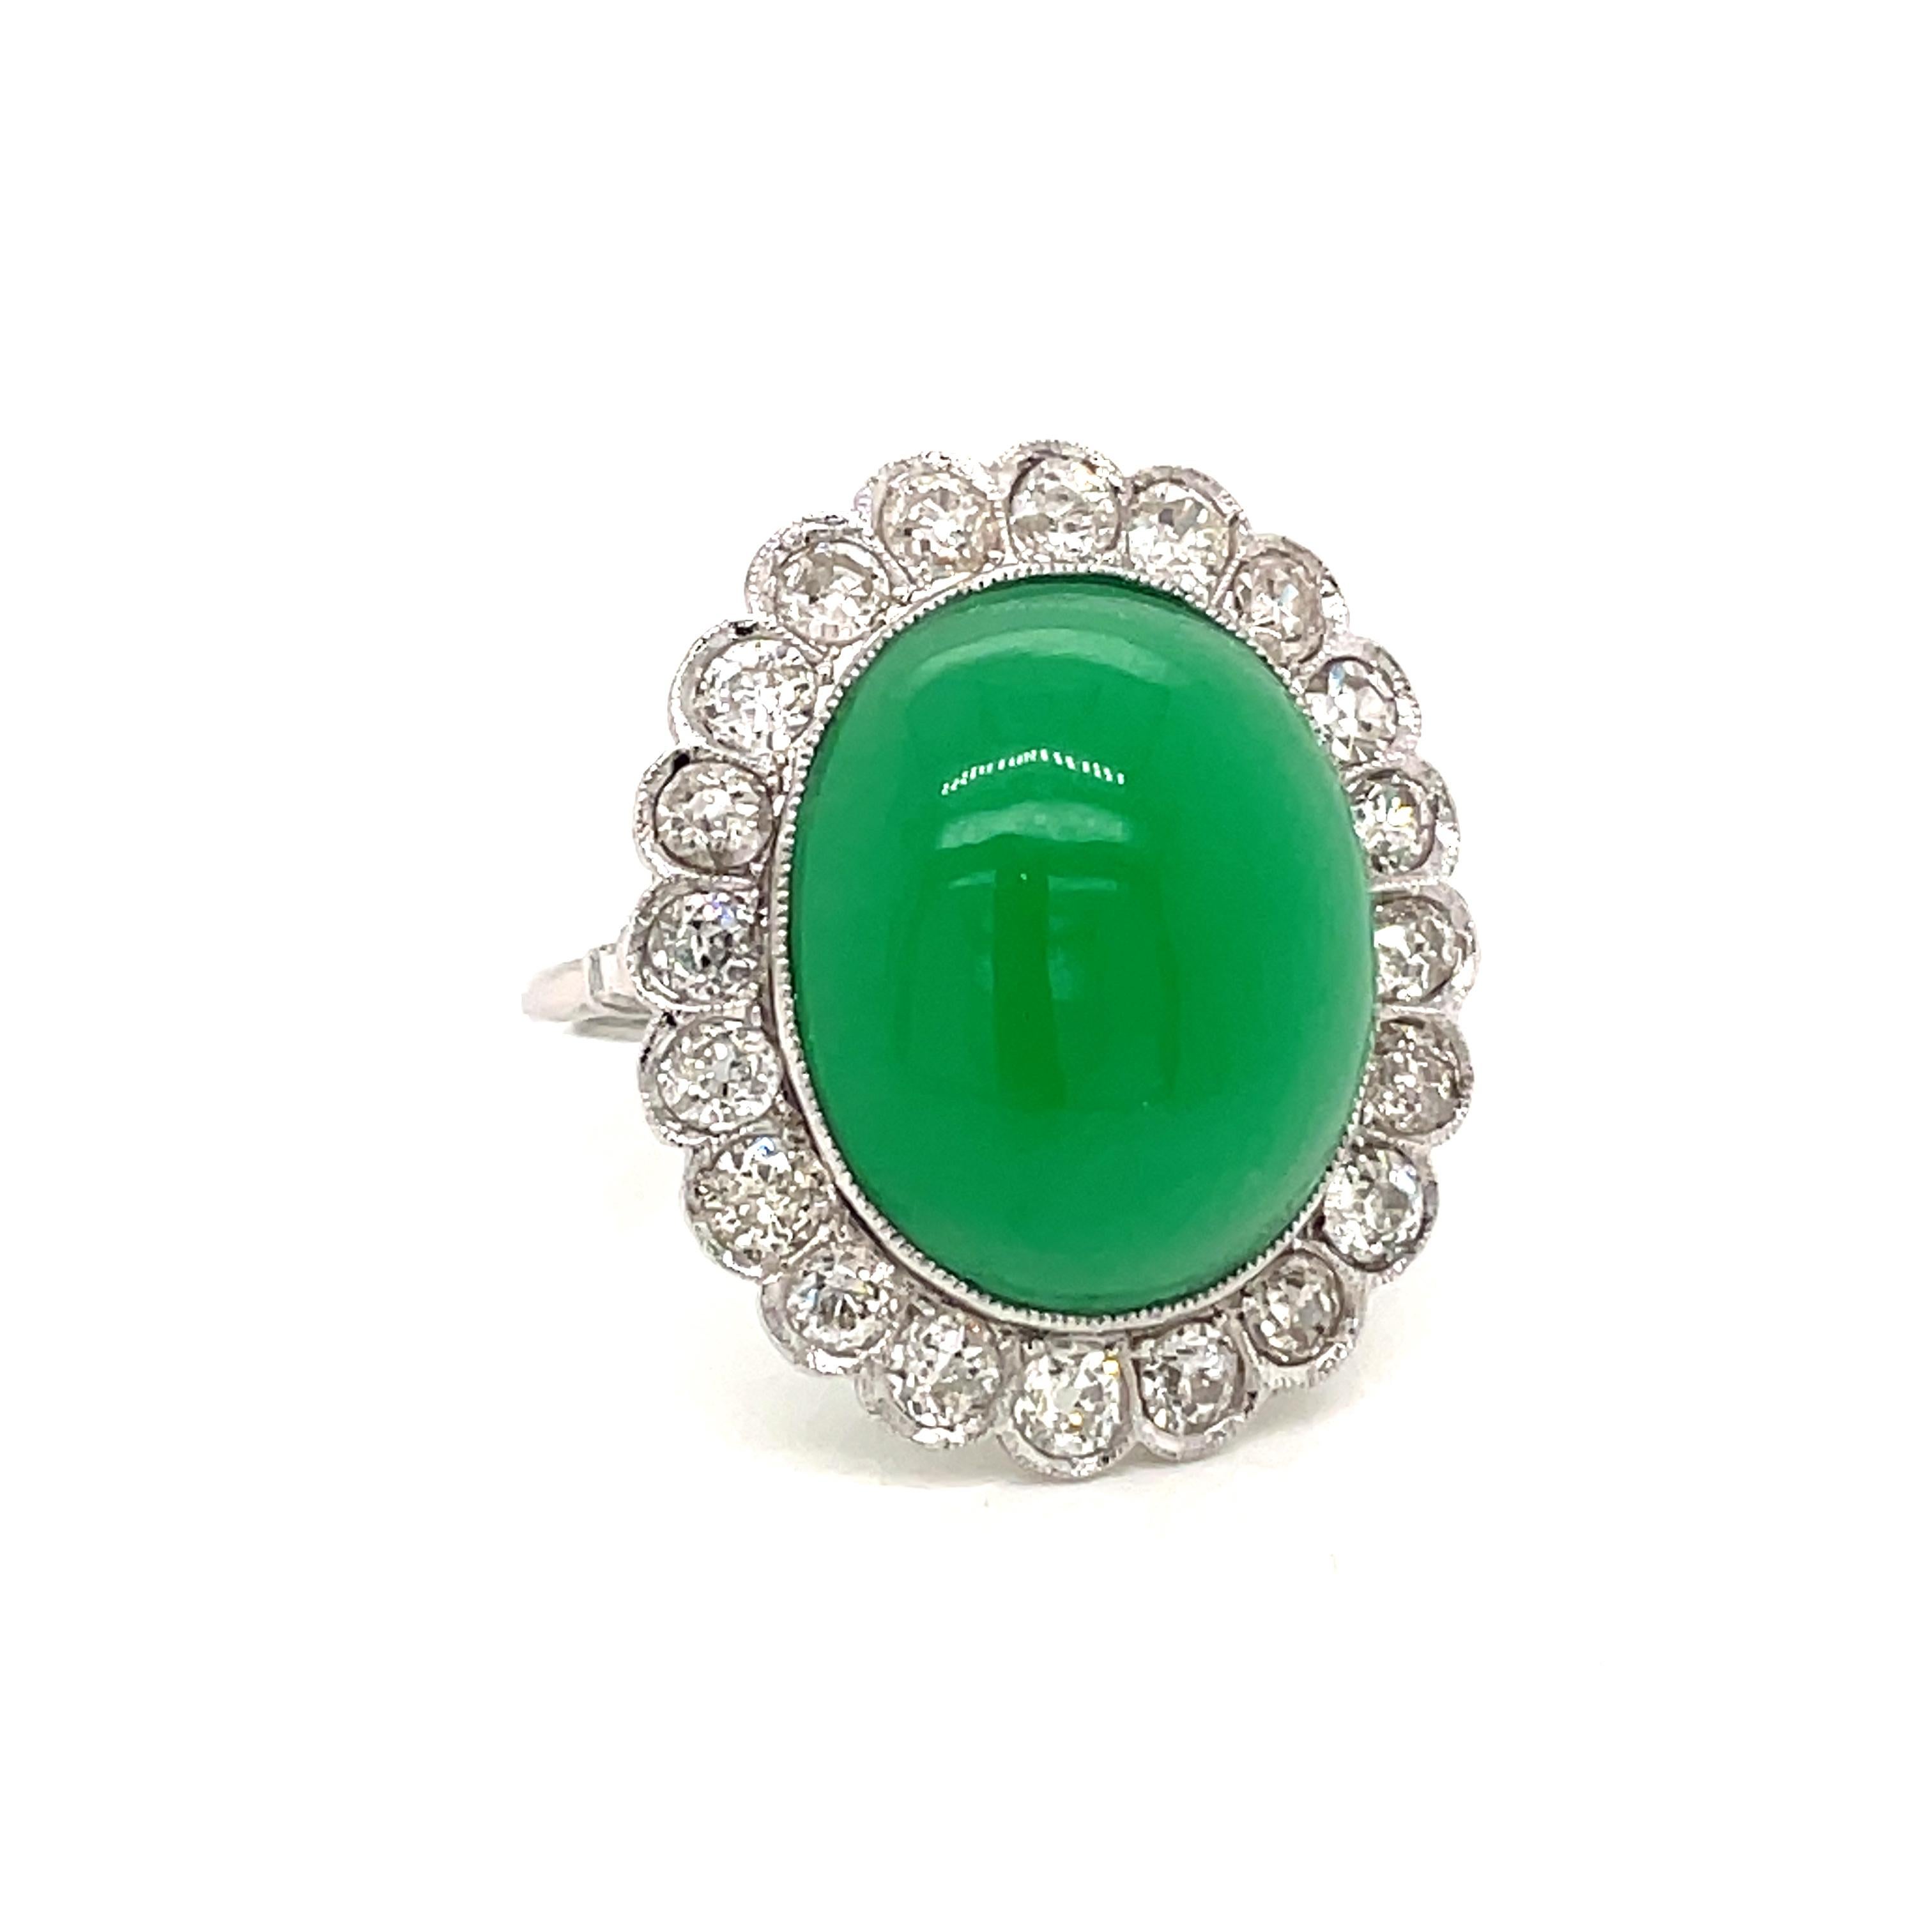 Platinum Diamond Ring, set in the center with a Beautiful oval cabochon Jade weighing 13 carat framed by a round halo consisting of 2 carat of old mine cut diamonds graded H color and Vs clarity.
Circa 1980

CONDITION: Pre-owned - Excellent
METAL: